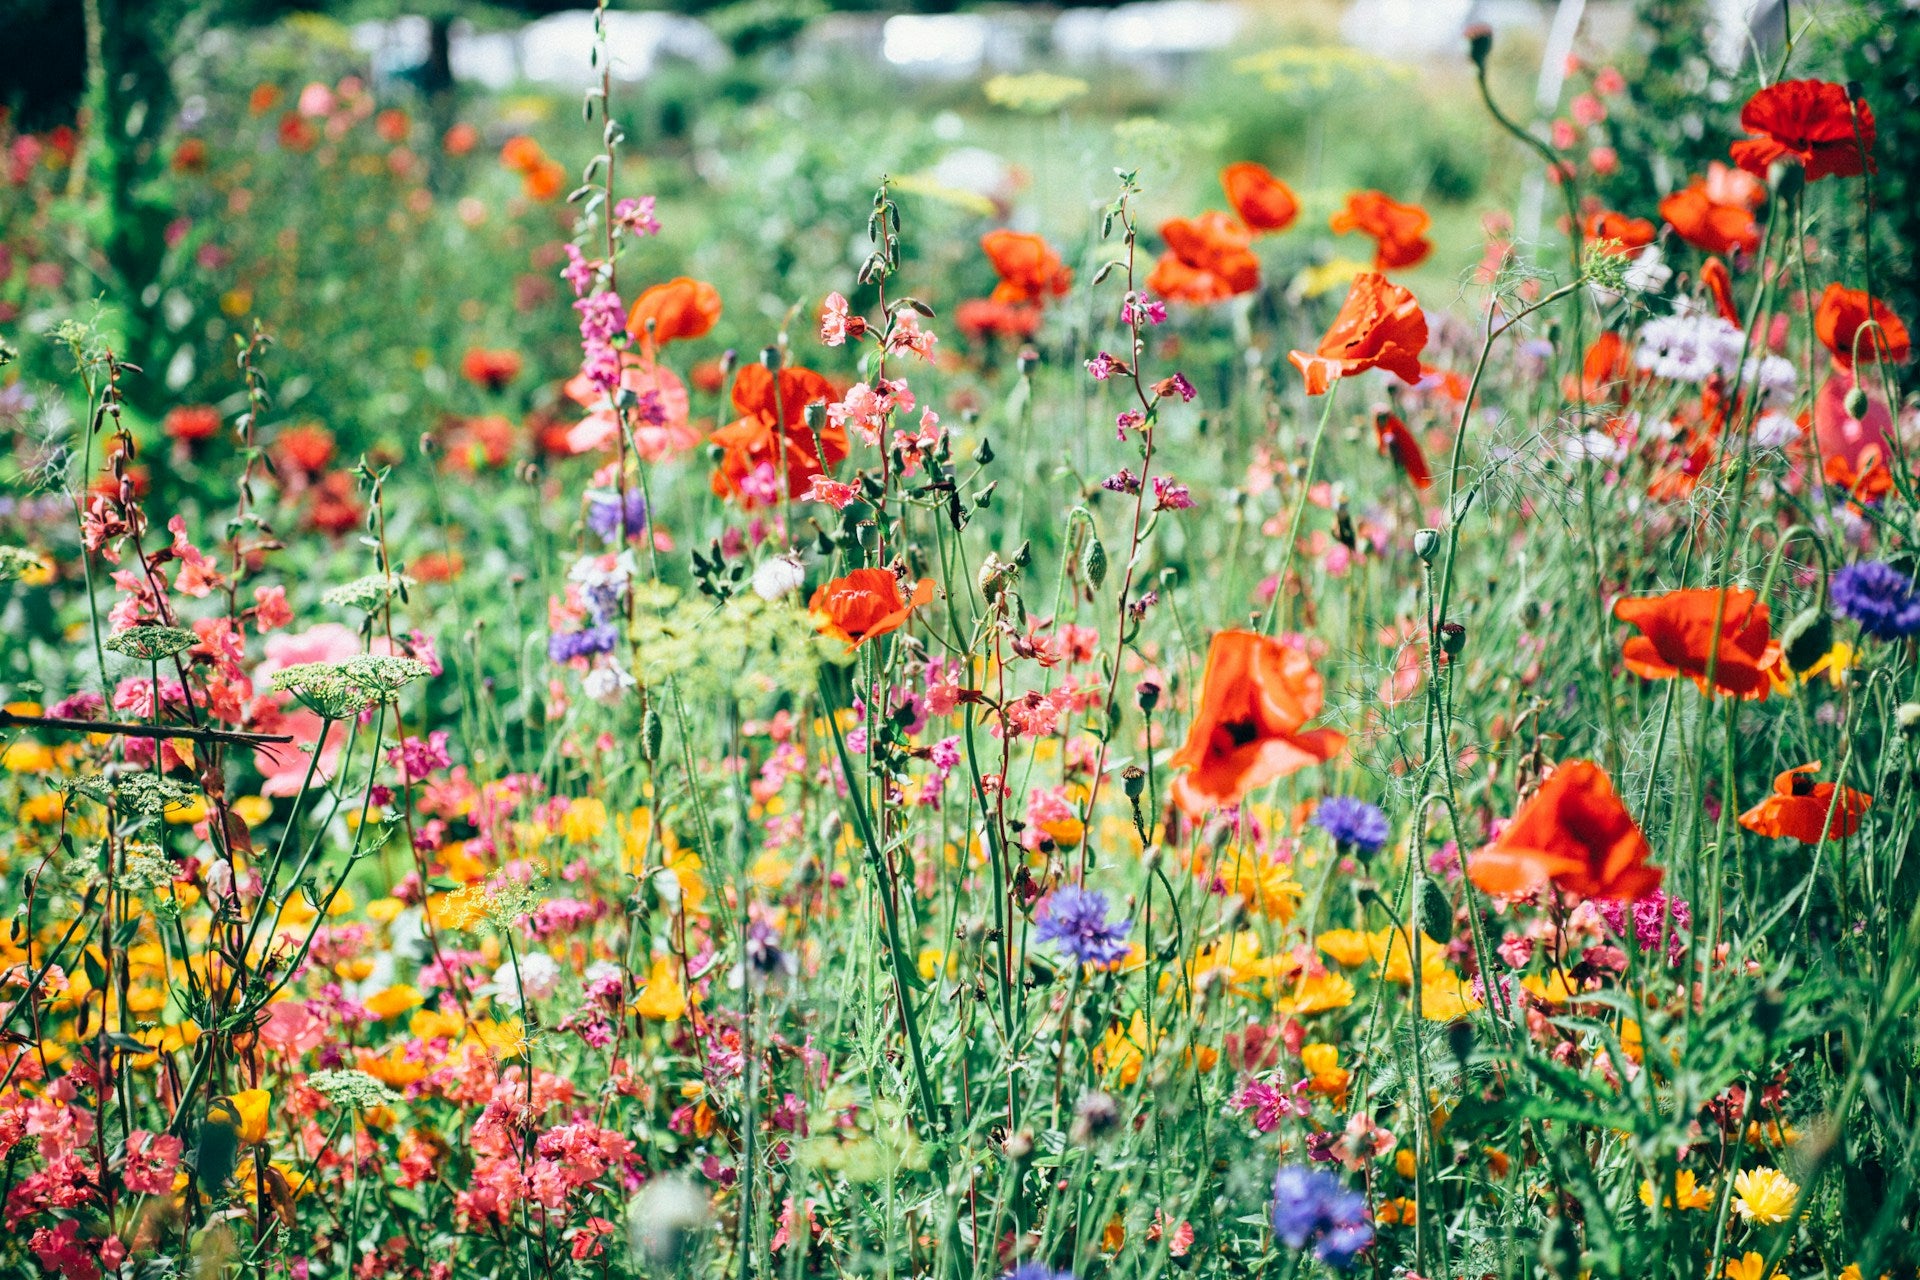 A collection of wildflowers in various colors.